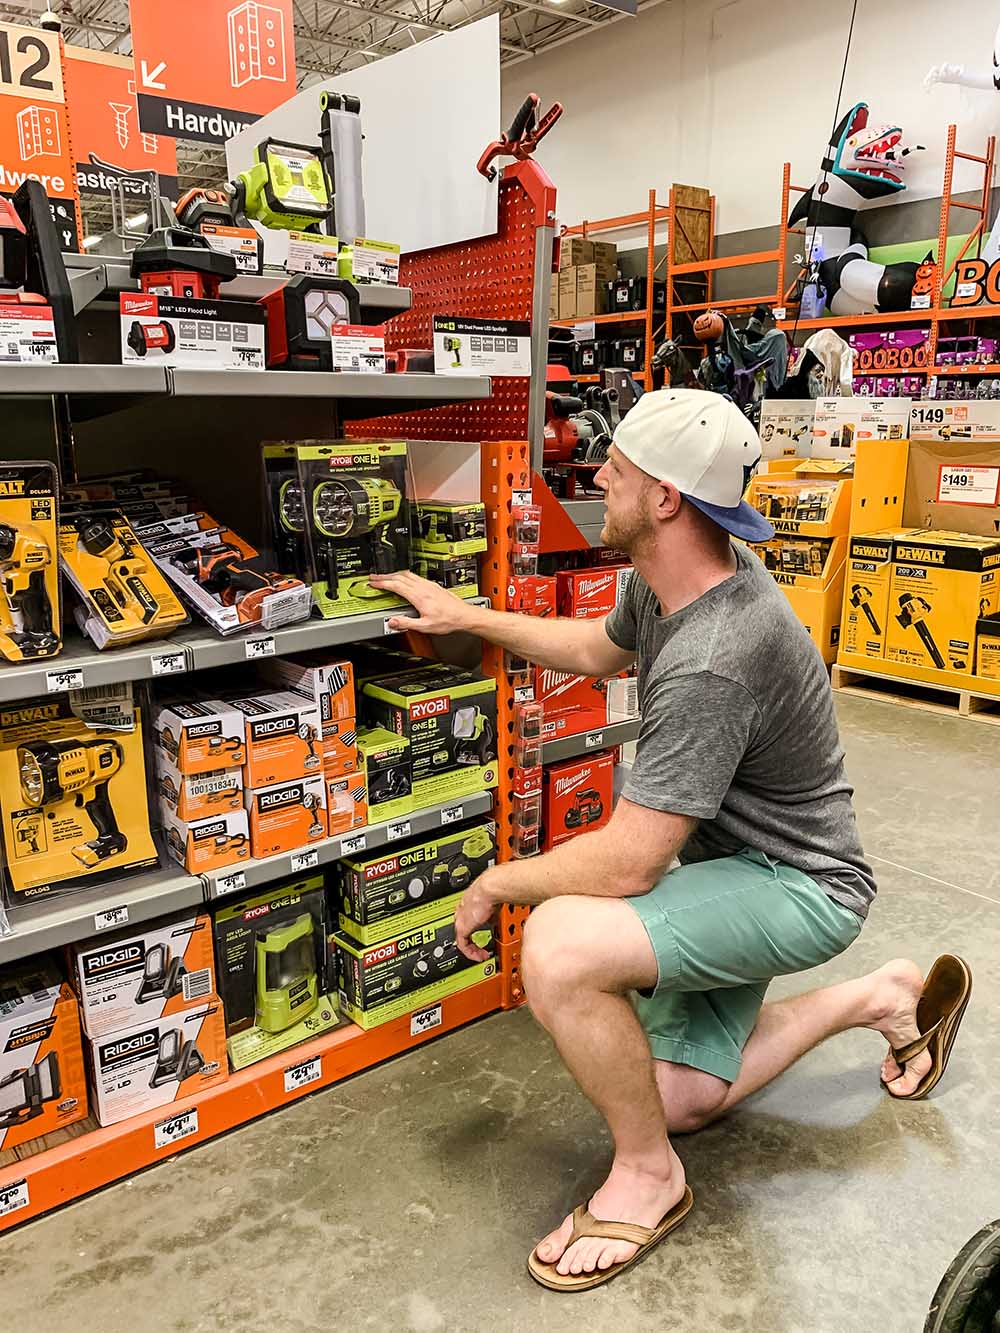 A man kneels in front of a shelf of products in The Home Depot.